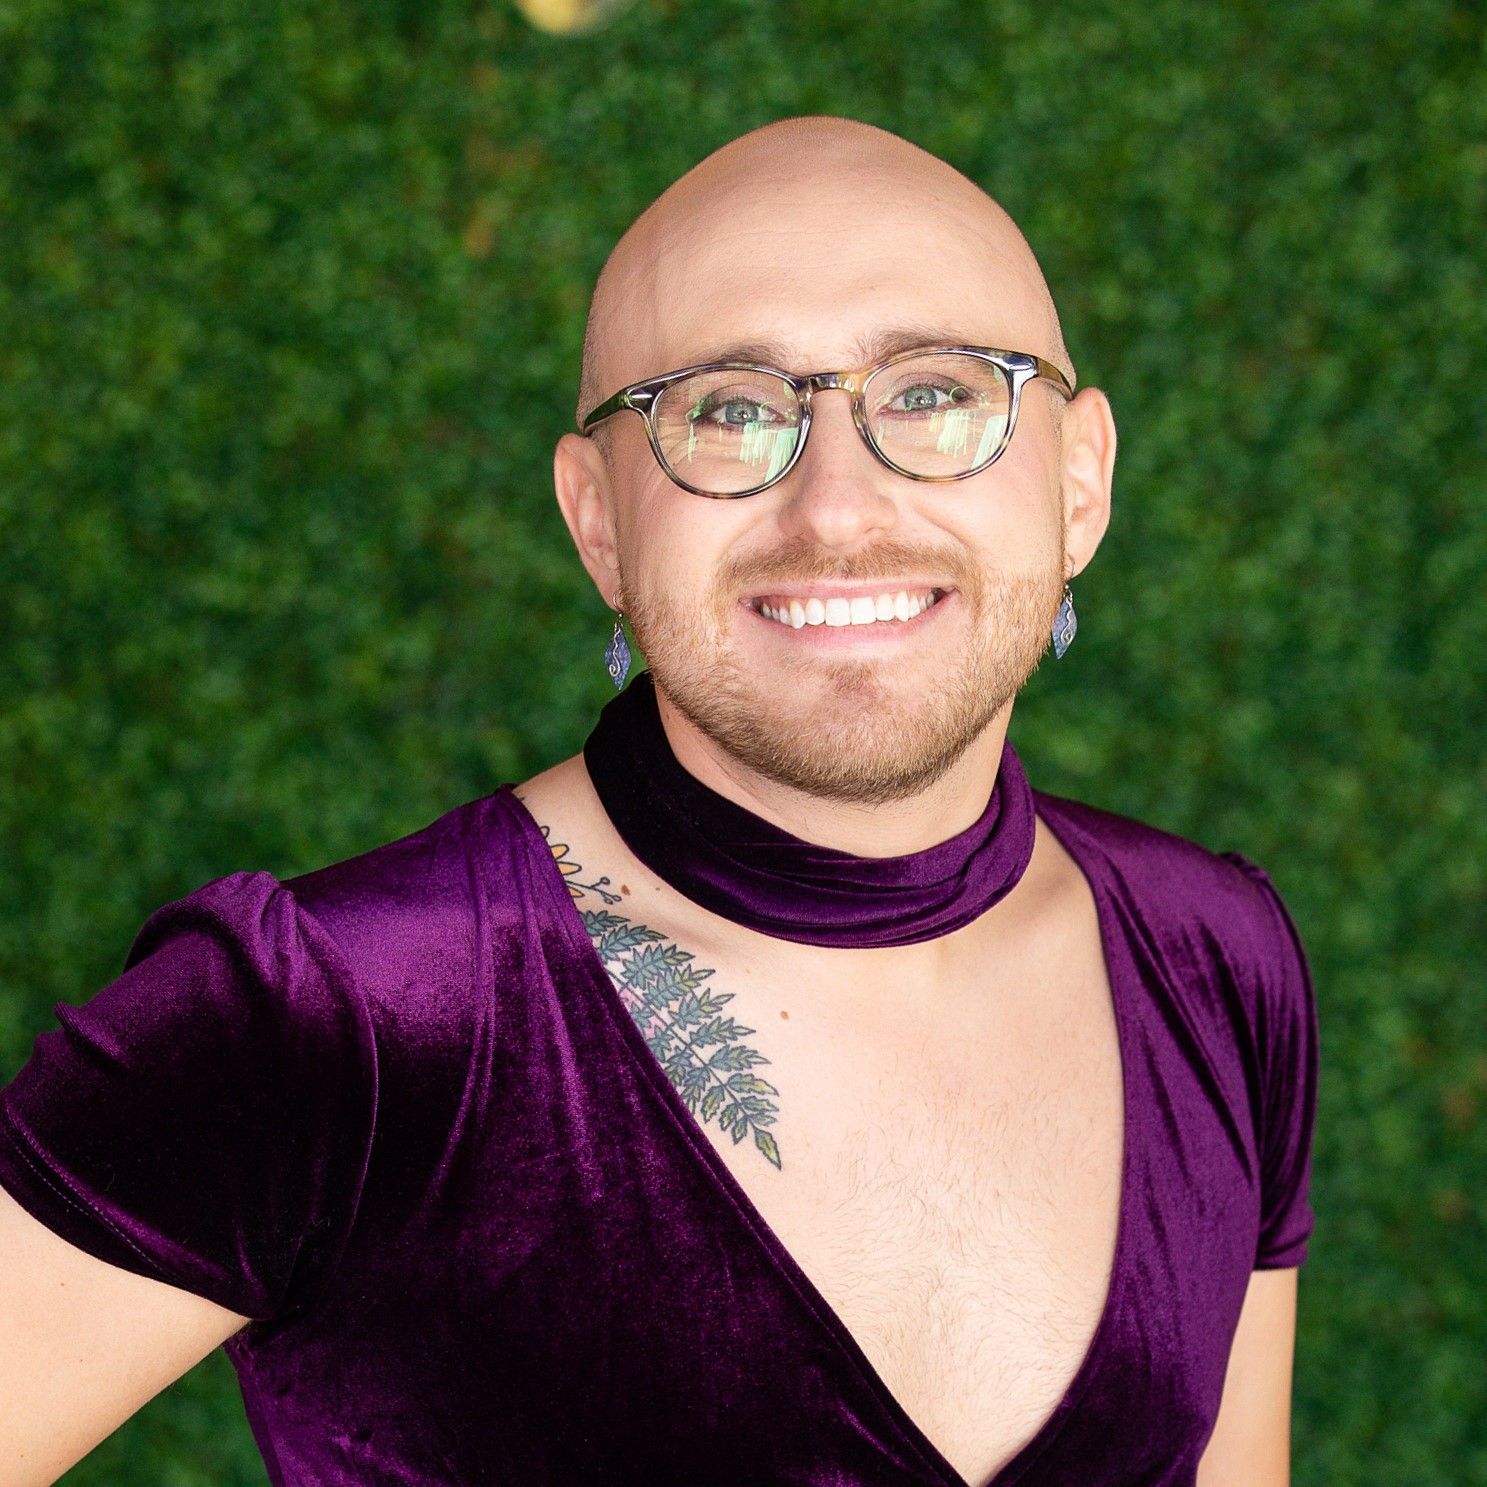 A bald man wearing glasses and a purple dress is smiling for the camera.